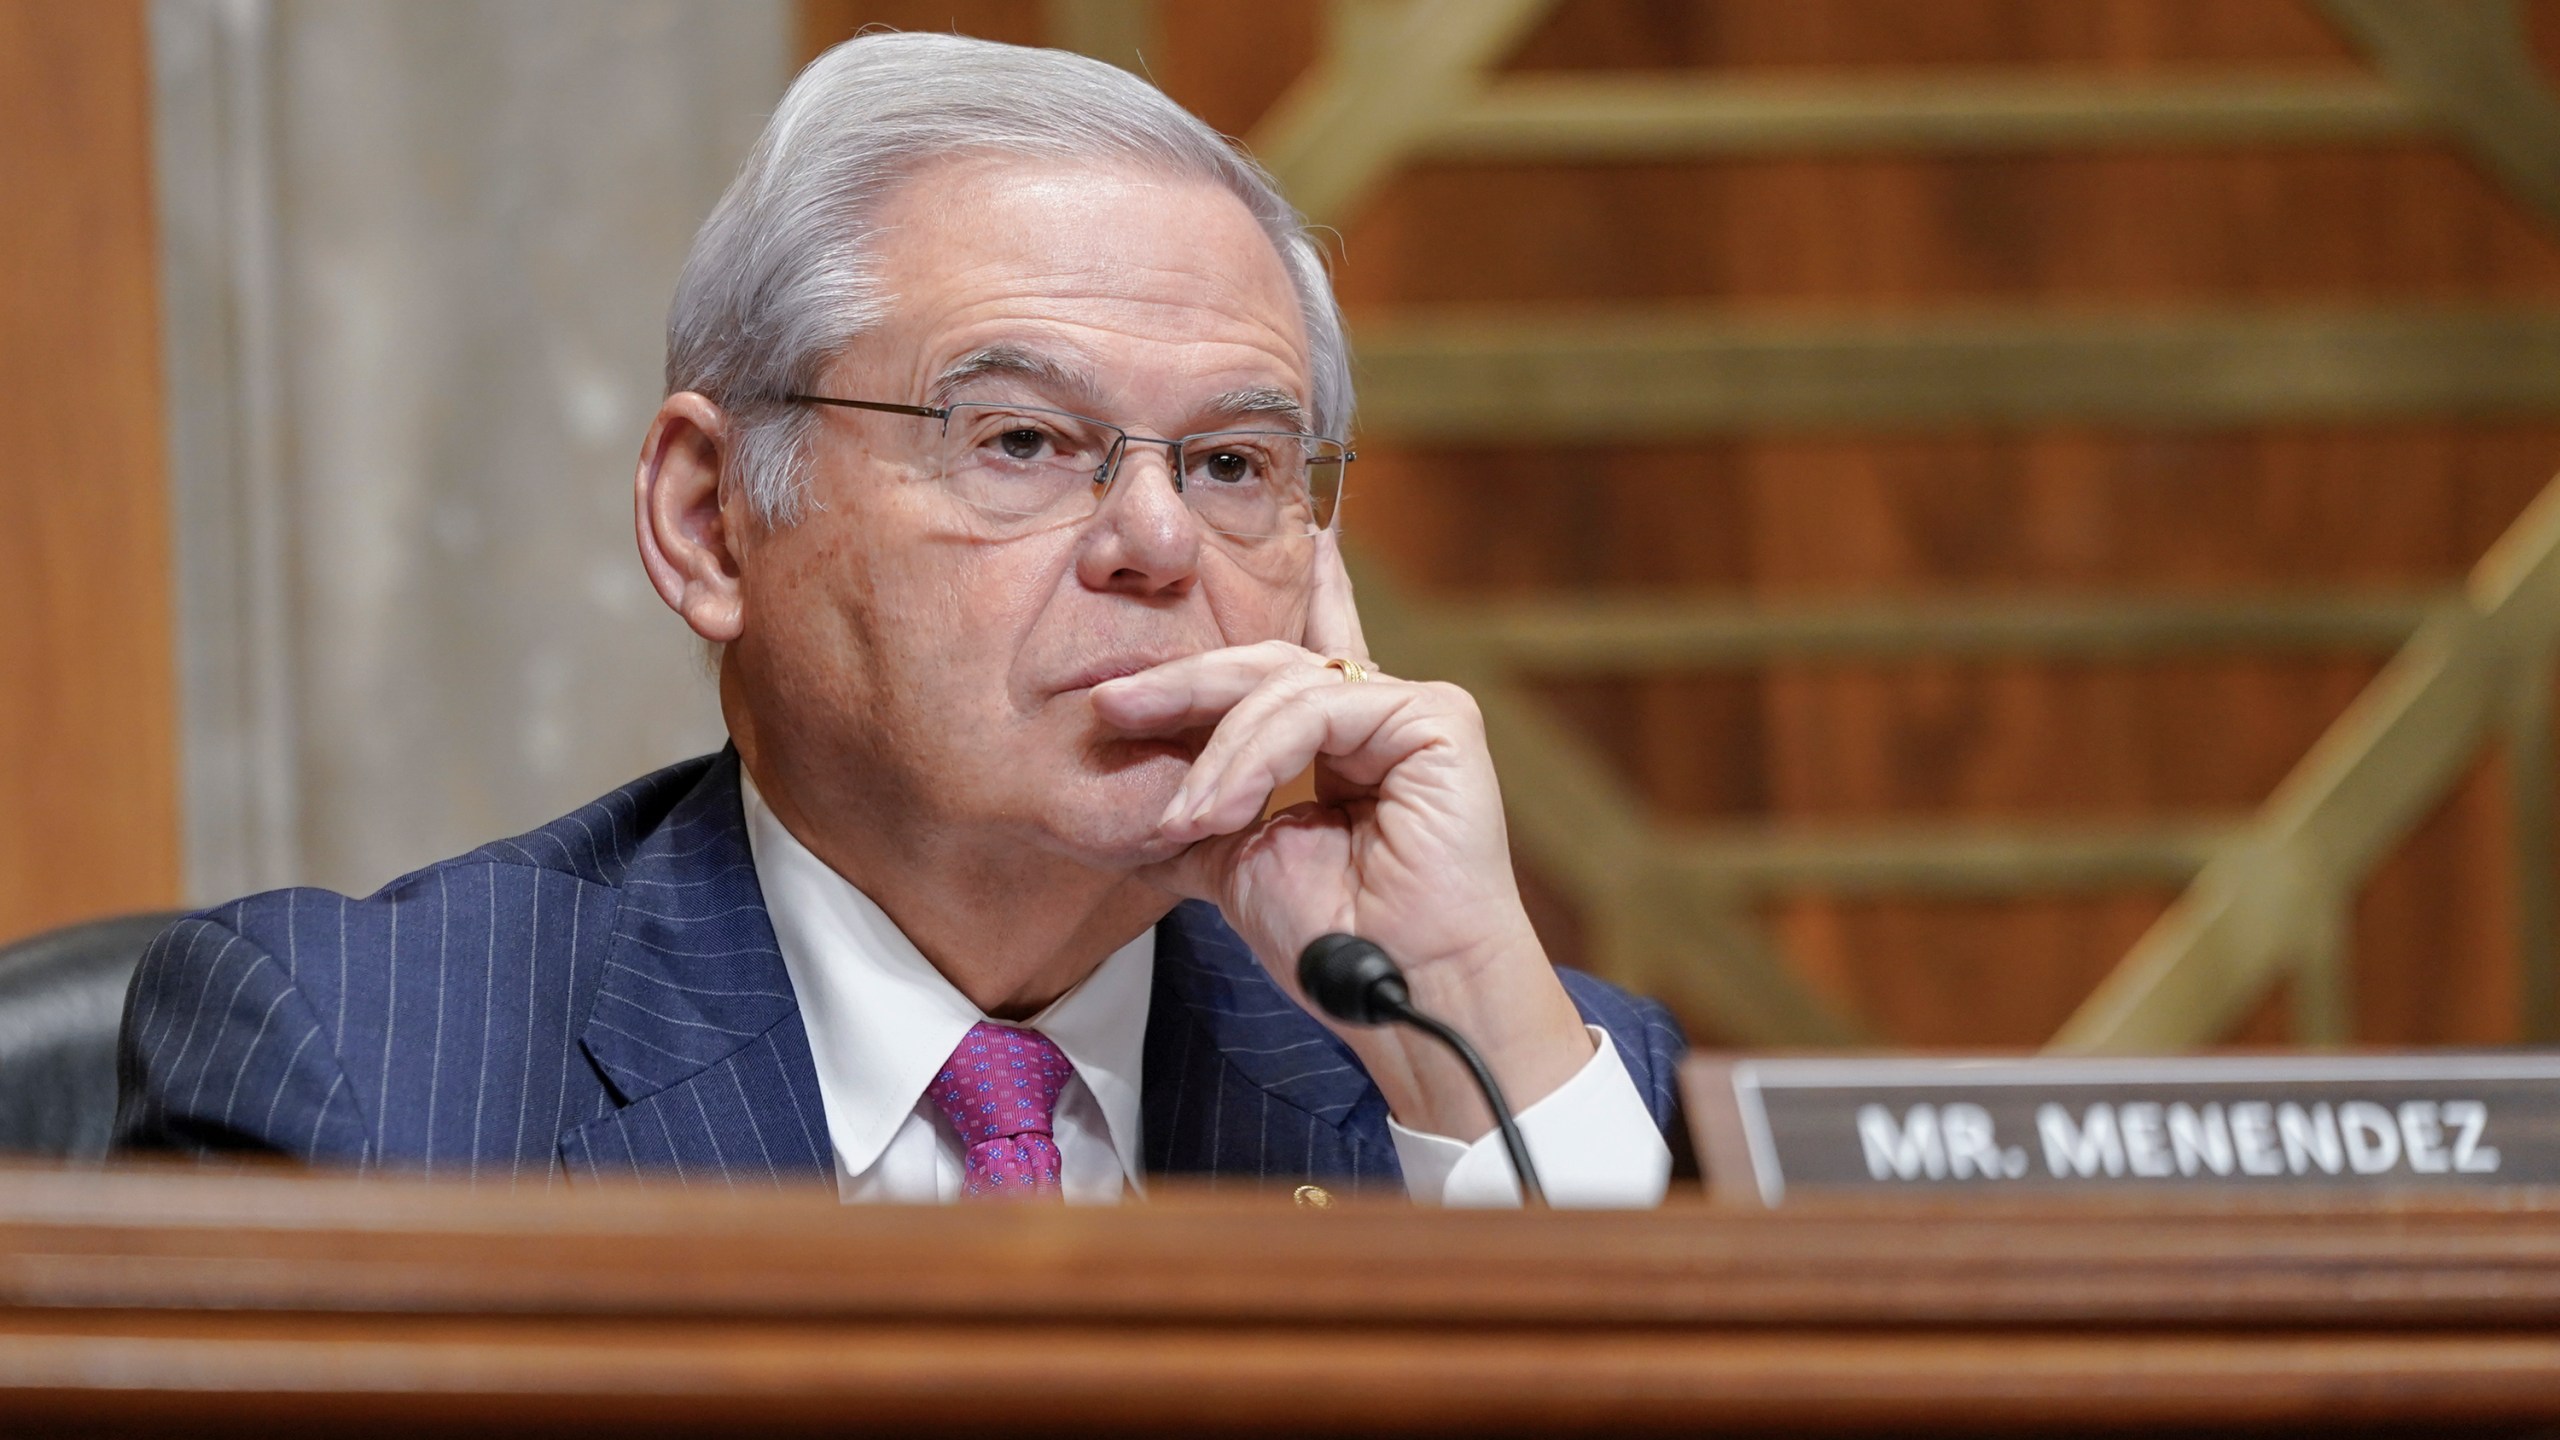 FILE - Sen. Bob Menendez, D-N.J., listens during a Senate Foreign Relations Committee, Thursday, Dec. 7, 2023, in Washington. New obstruction of justice crimes were added Tuesday, March 5, 2024, to charges against Menendez and his wife that allege they accepted gold bars, cash and a luxury car in return for favors the senator carried out to assist three businessmen. Both have pleaded not guilty. (AP Photo/Mariam Zuhaib, File)